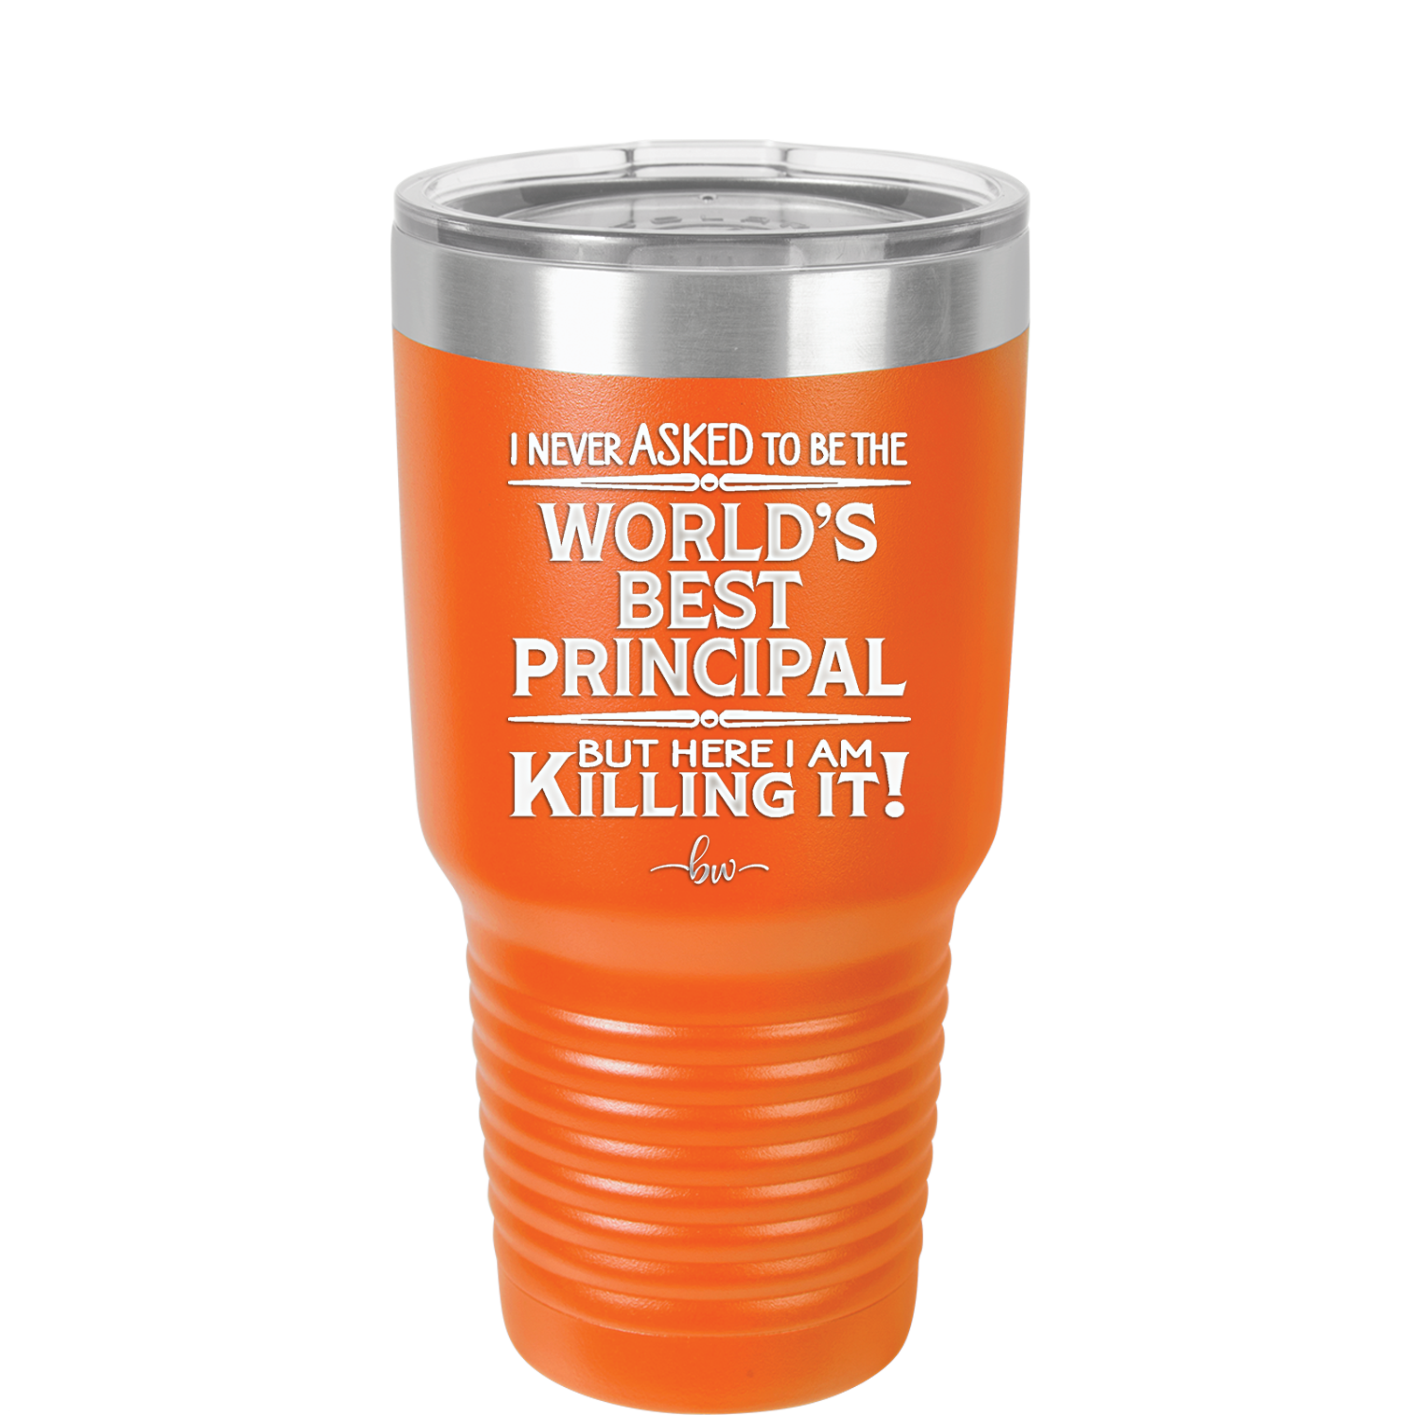 I Never Asked to Be the World's Best Principal - Laser Engraved Stainless Steel Drinkware - 1557 -